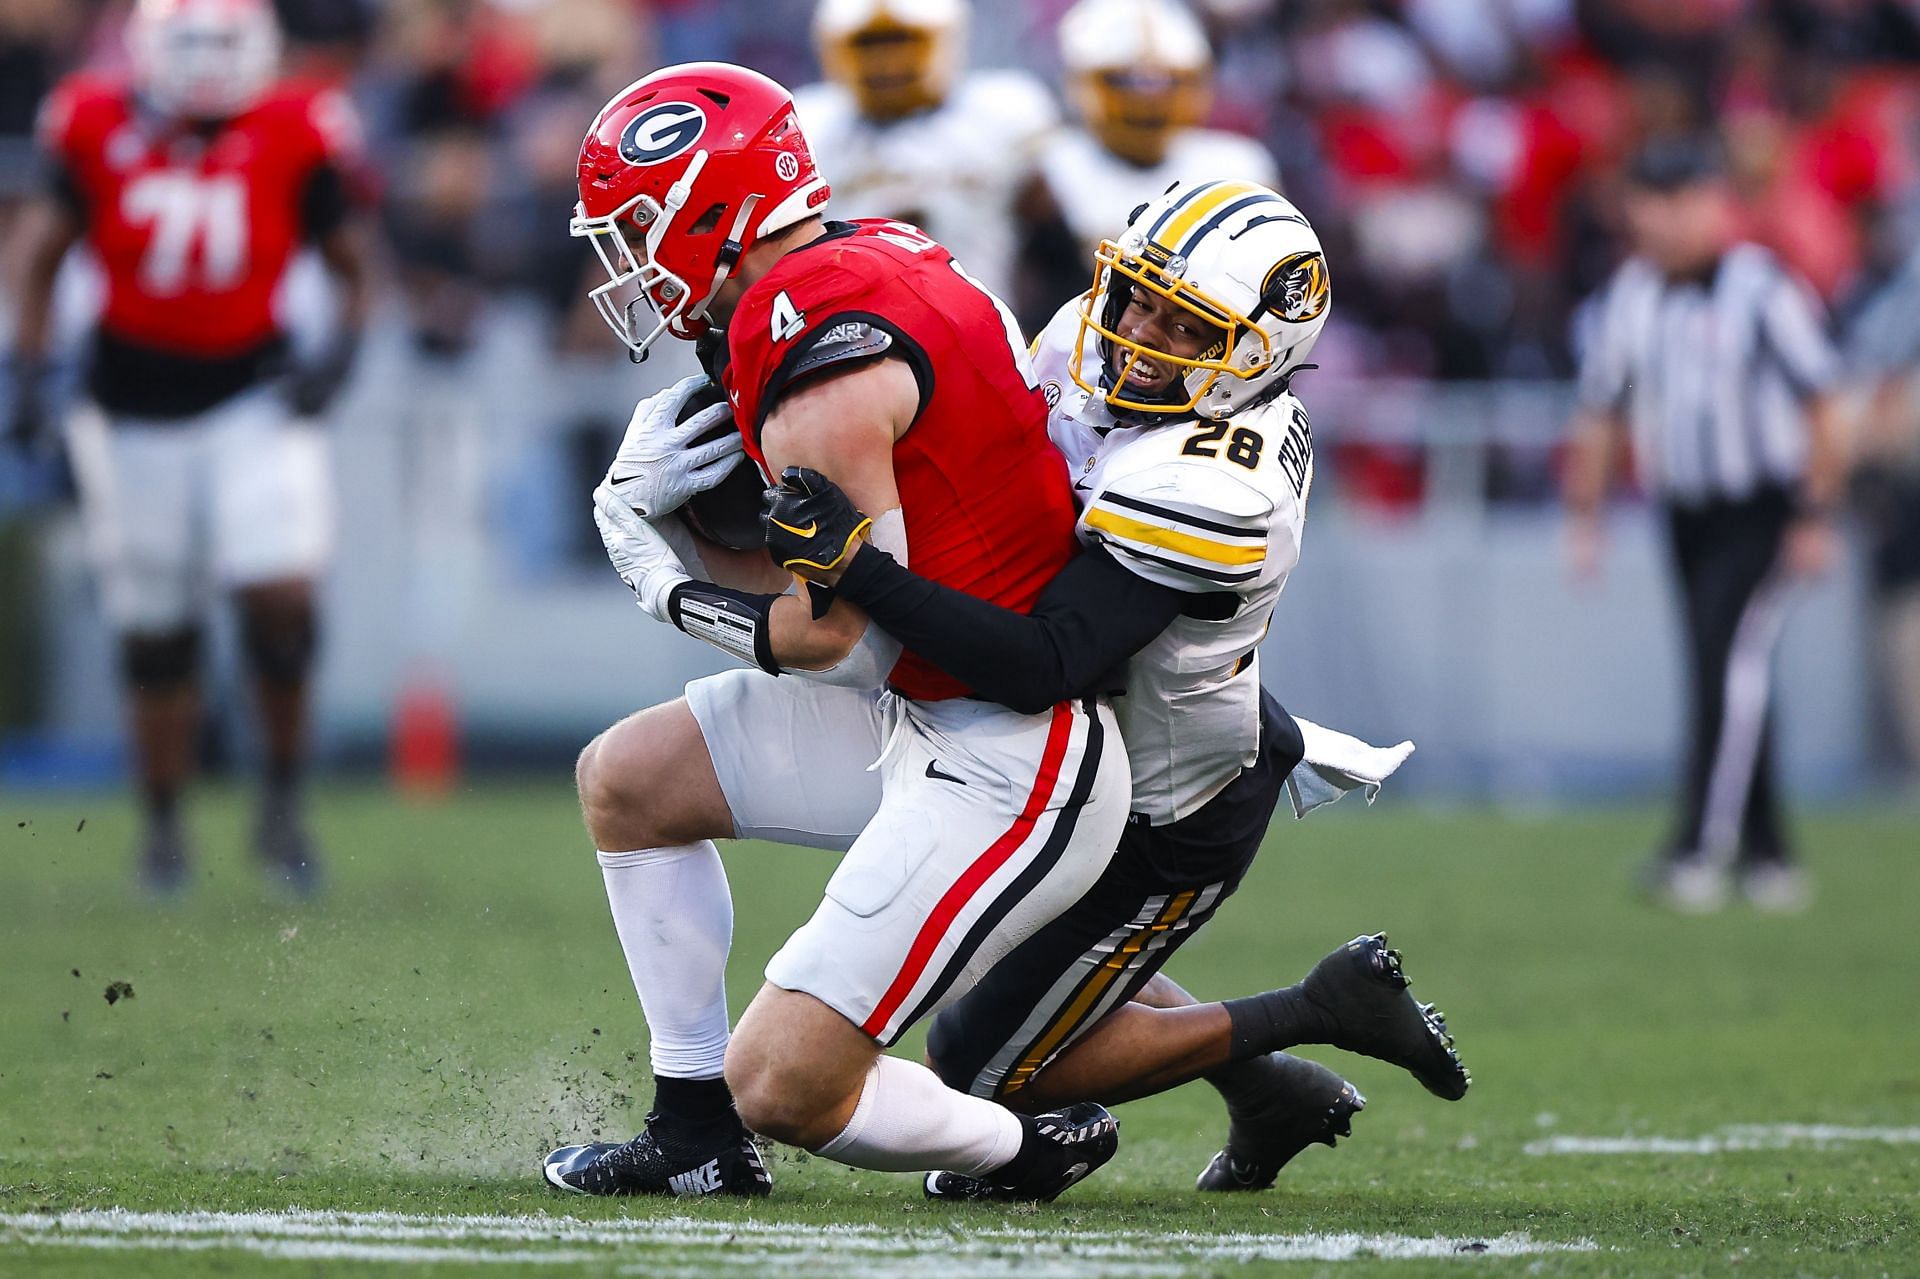 Tight end Oscar Delp is a player to watch for the Georgia Bulldogs in Spring.